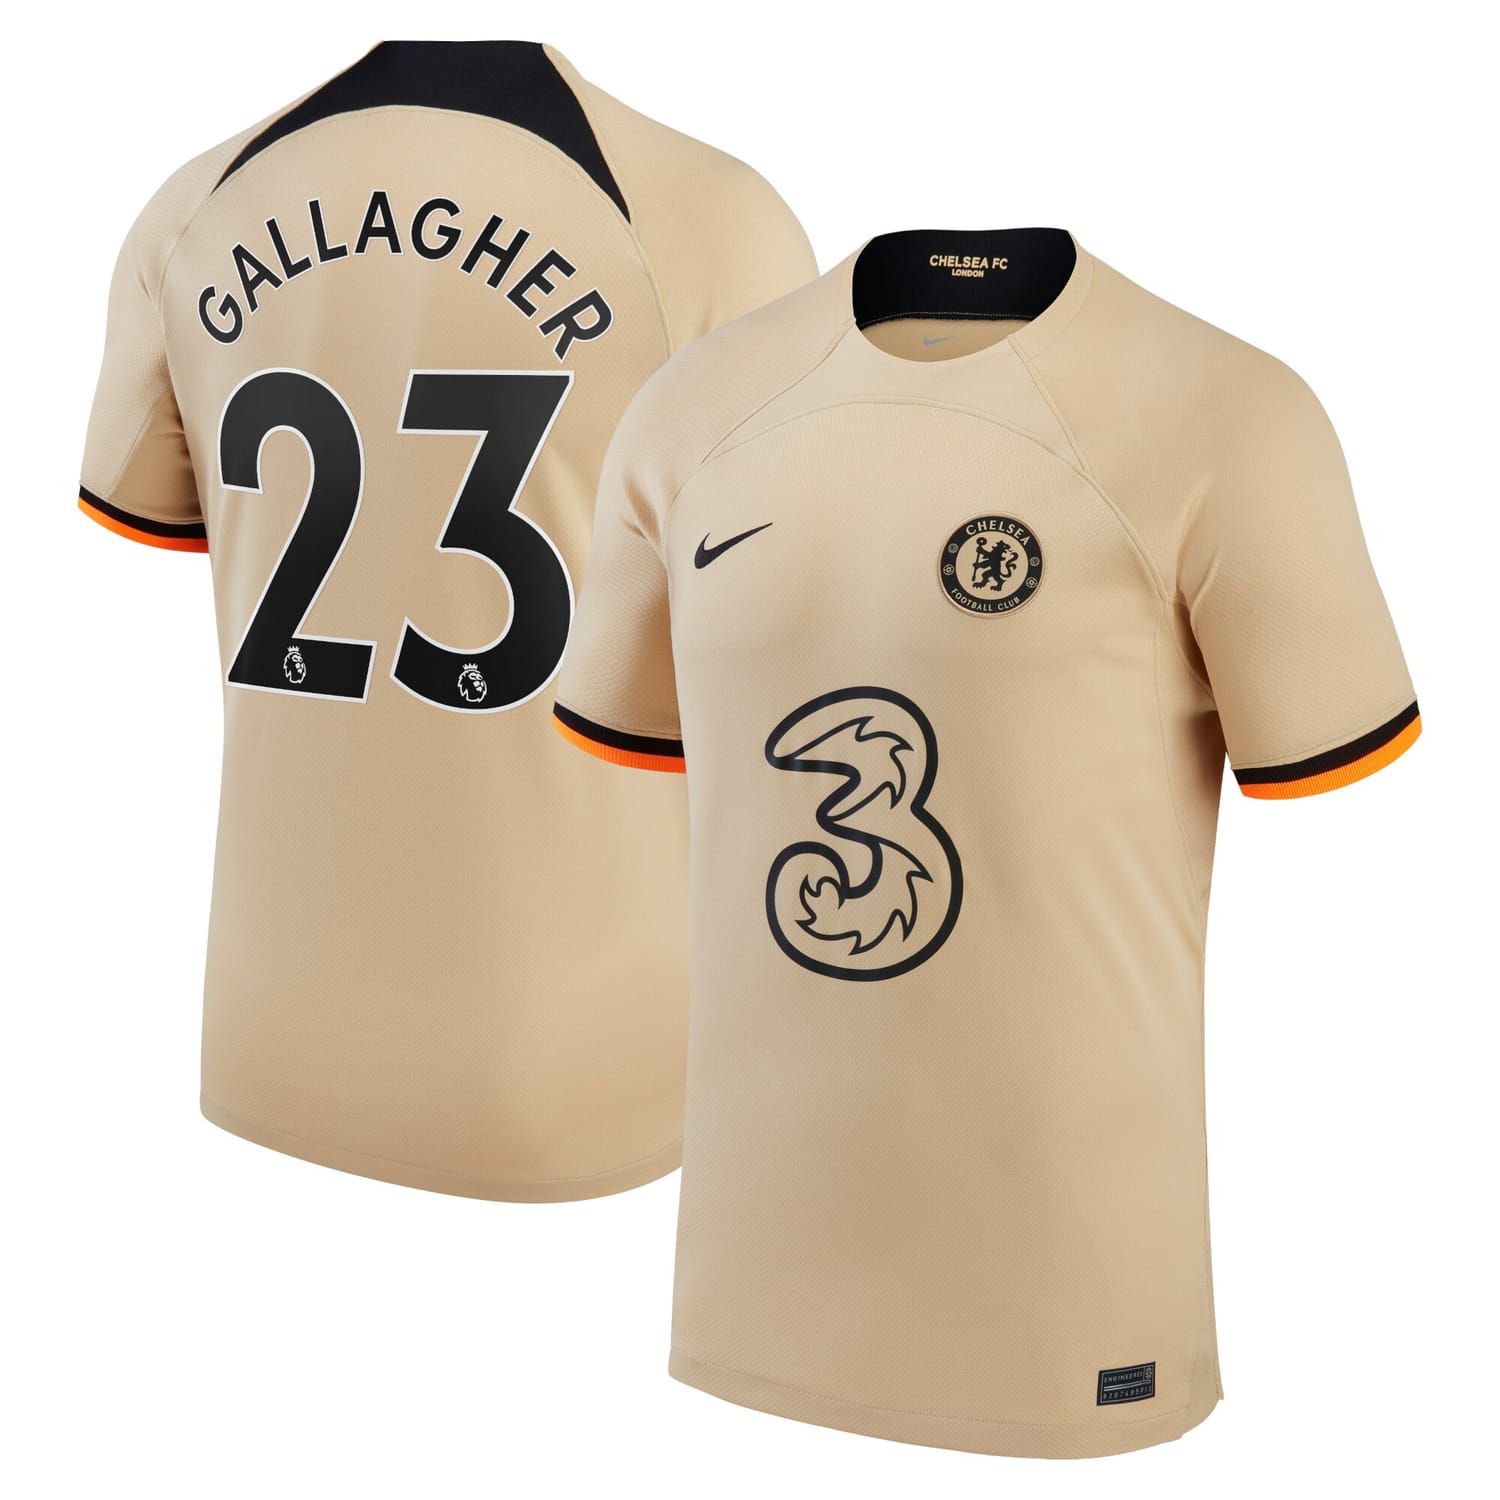 Premier League Chelsea Third Jersey Shirt 2022-23 player Conor Gallagher 23 printing for Men